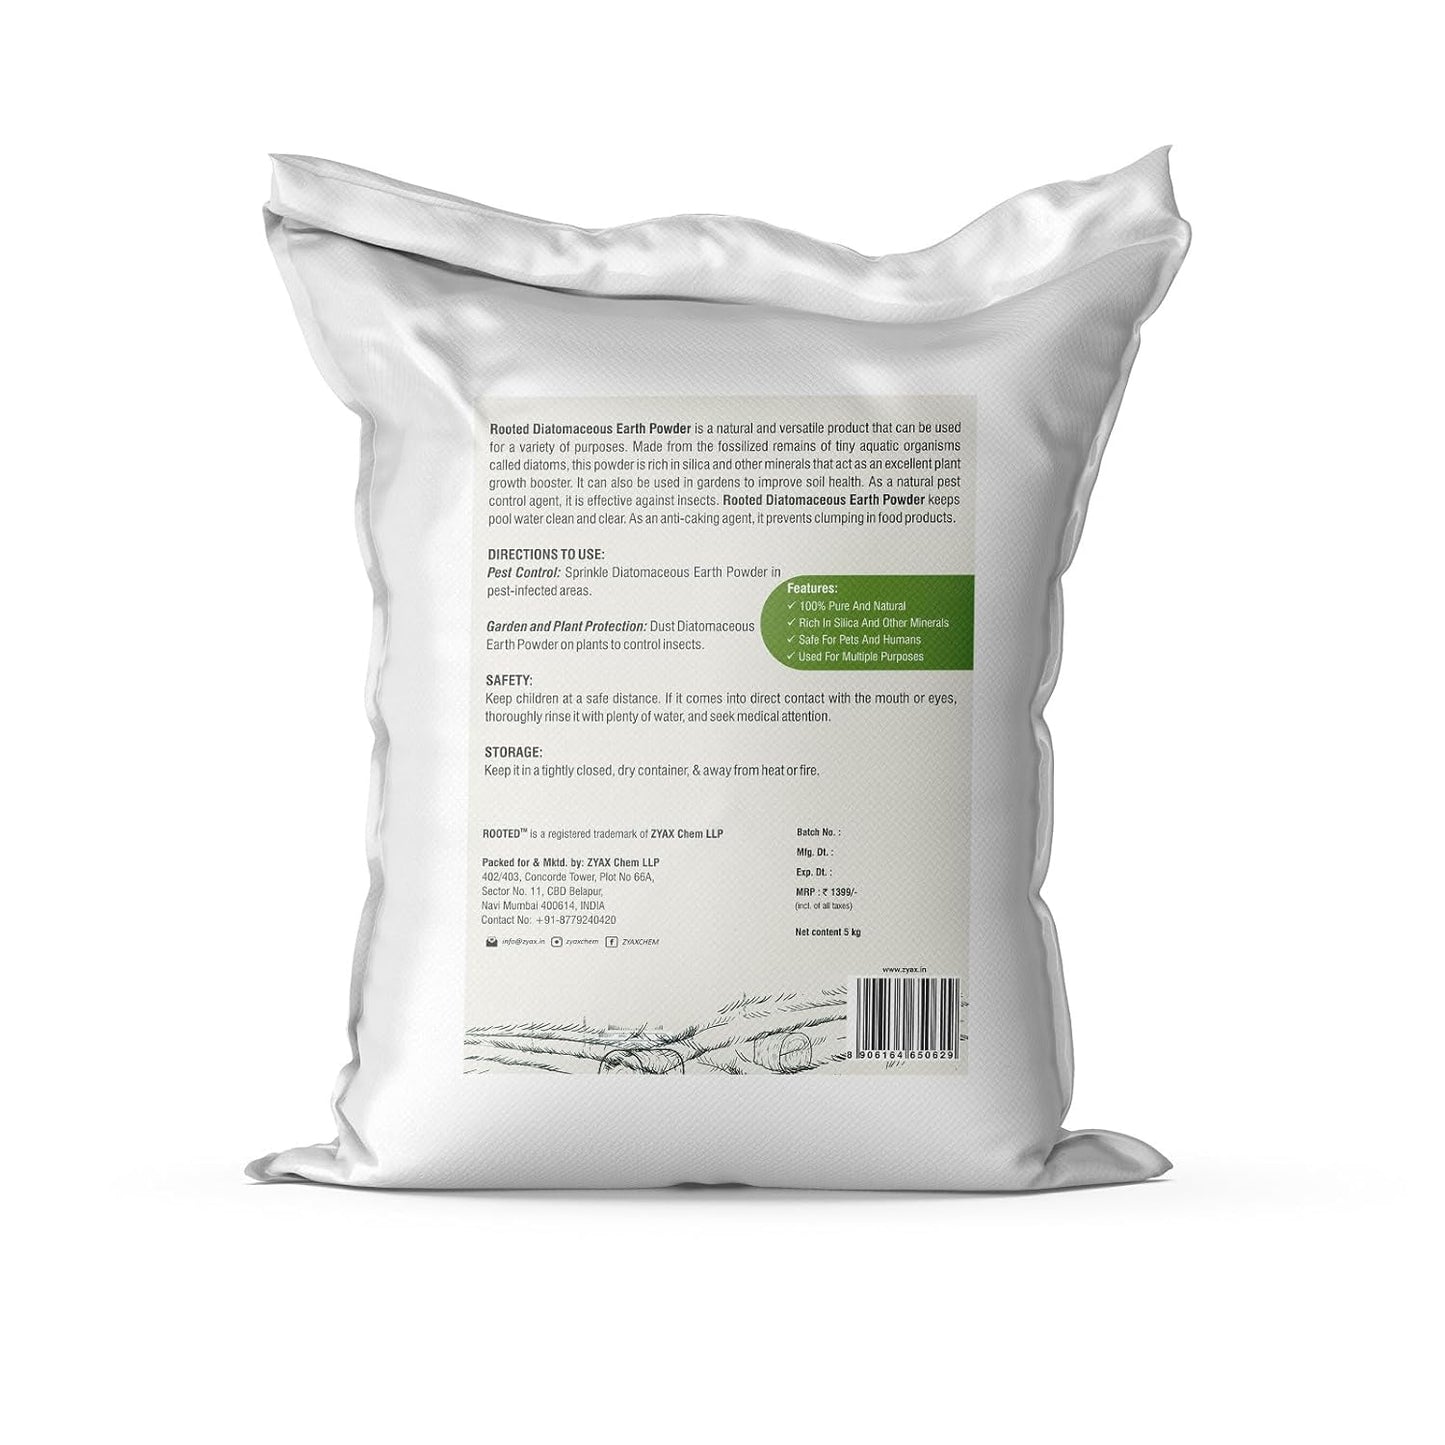 Rooted Diatomaceous Earth Powder